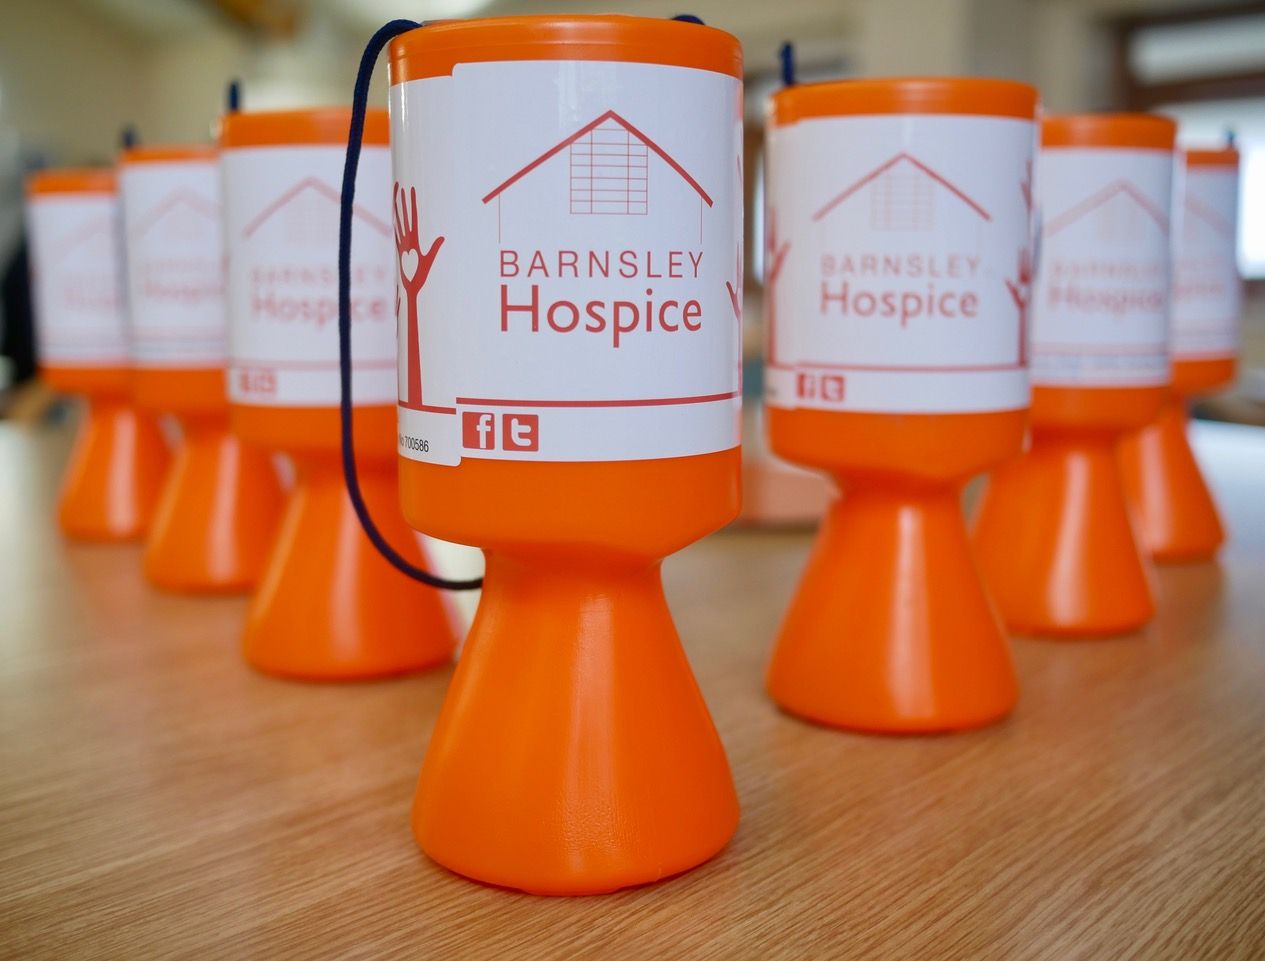 'Please continue to support us' says Barnsley Hospice